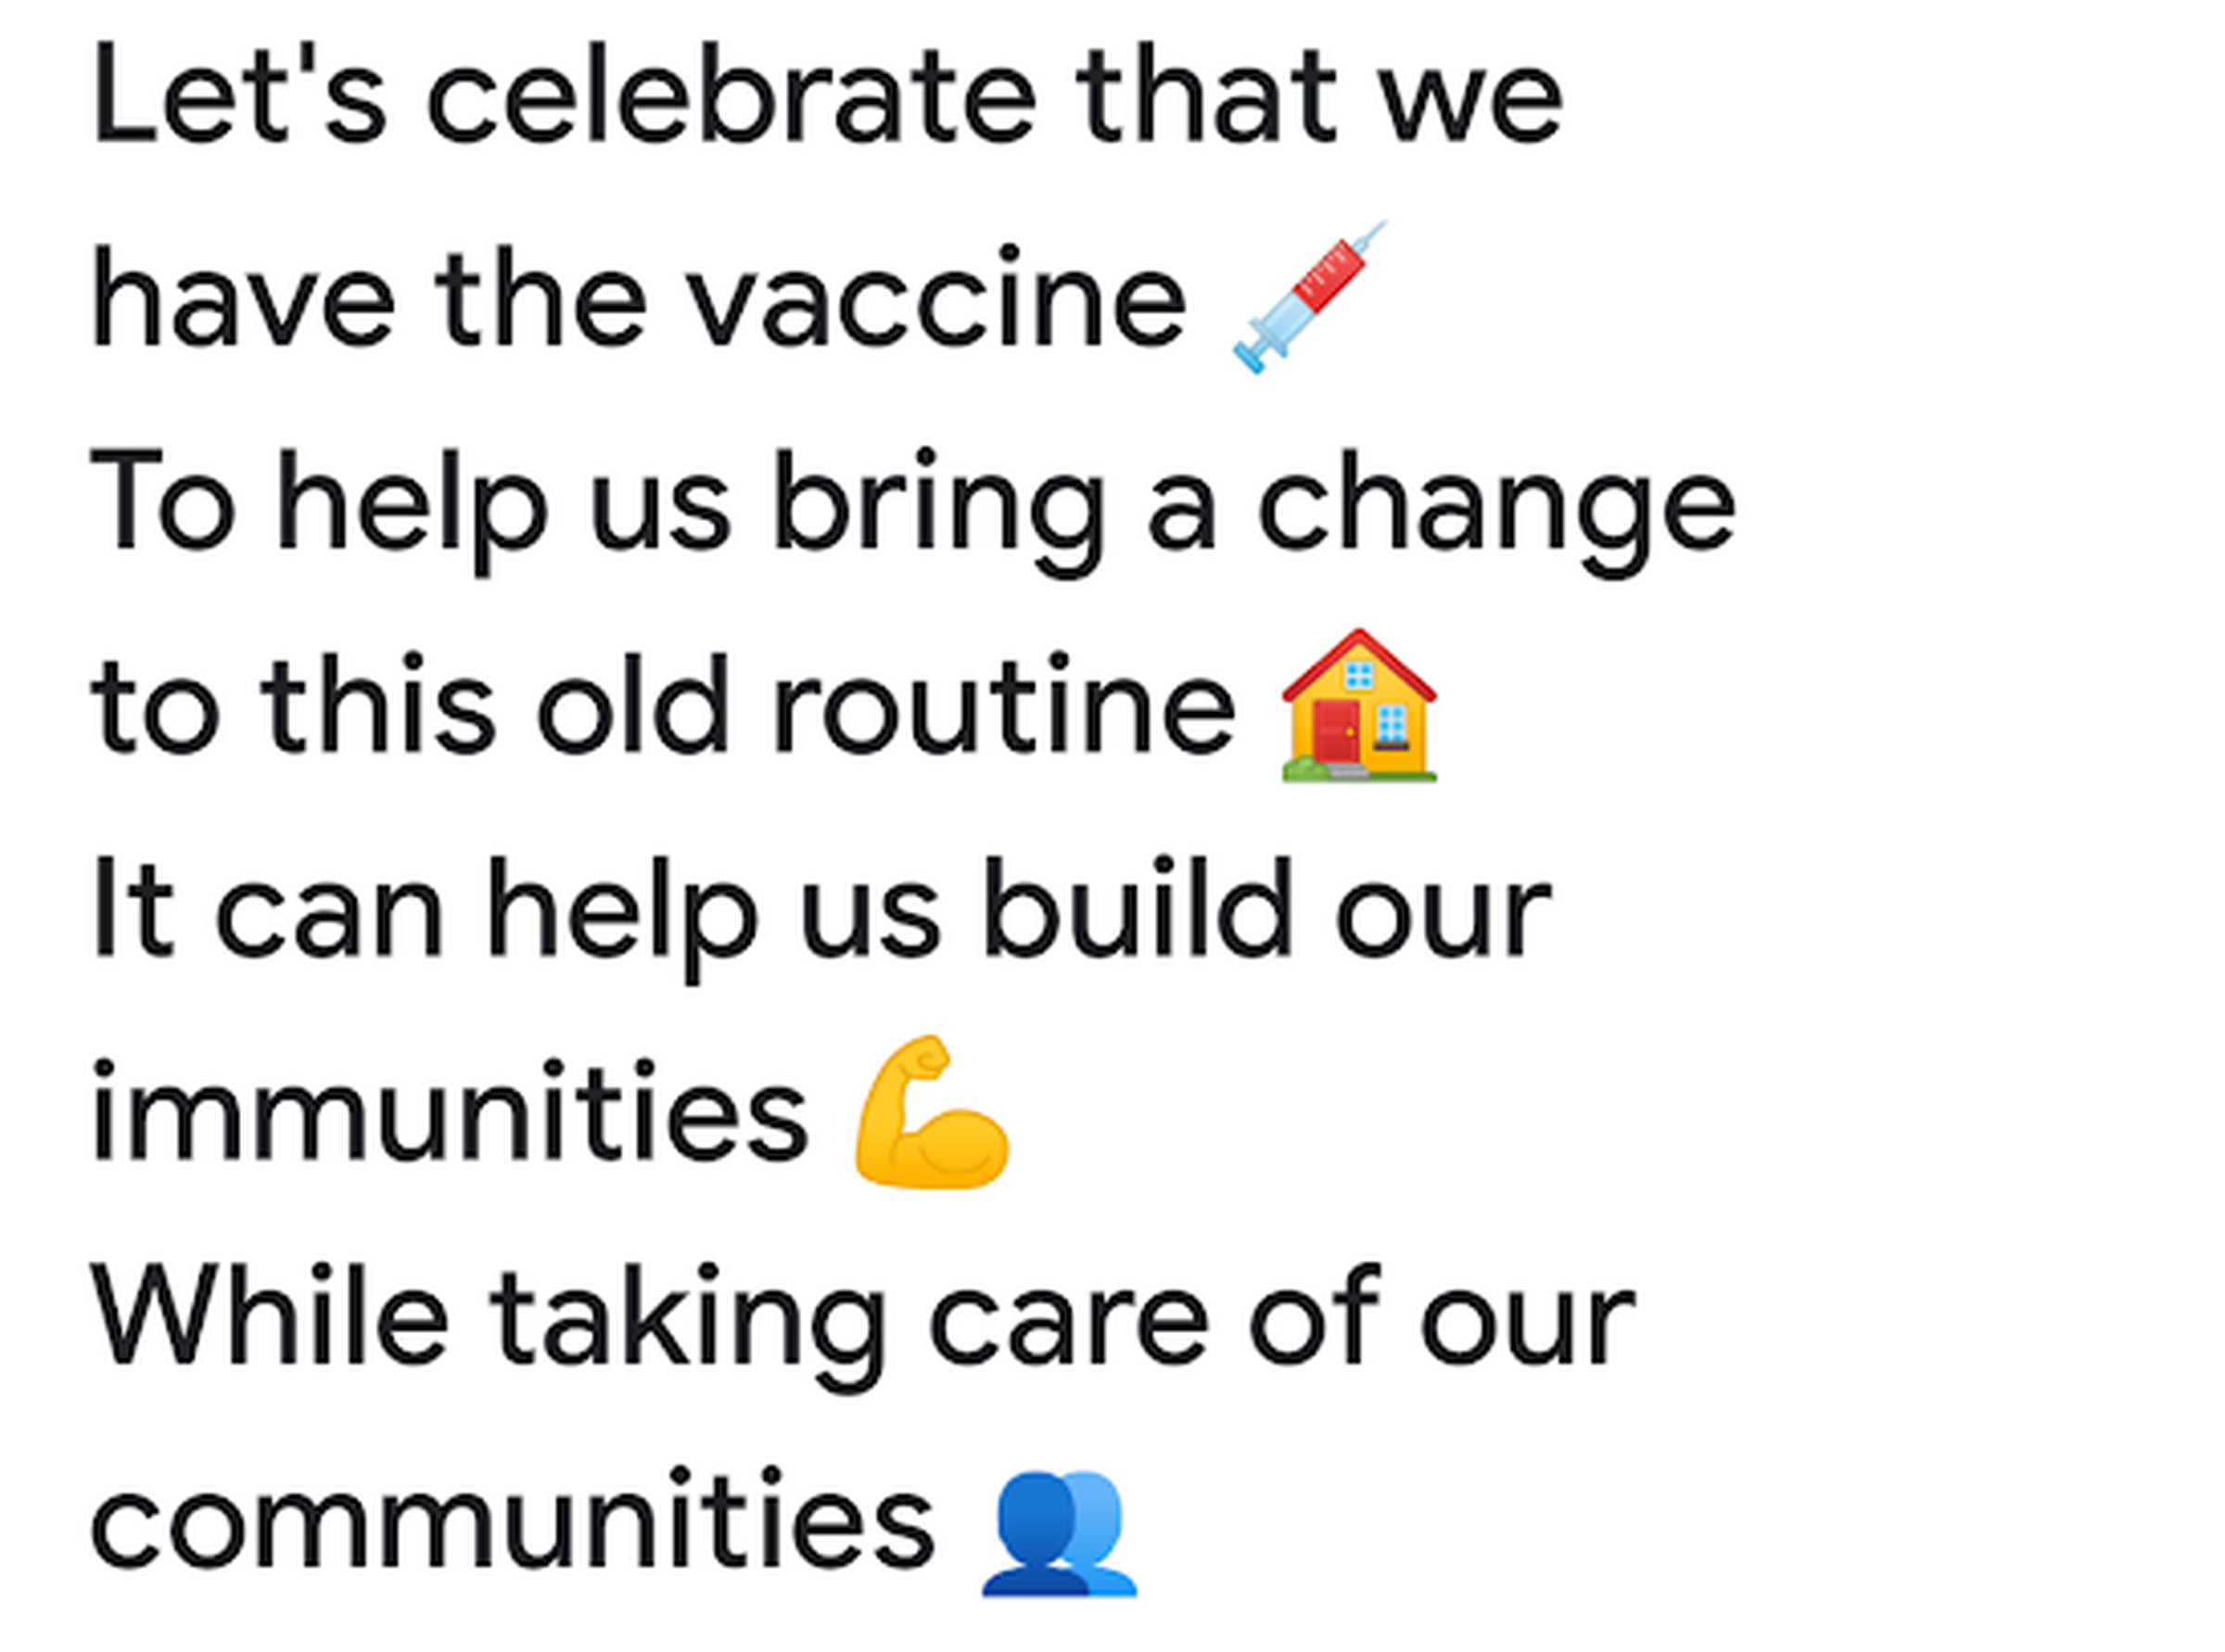 Let’s celebrate that we have the vaccine To help us bring a change to this old routine It can help us build our immunities While taking care of our communities